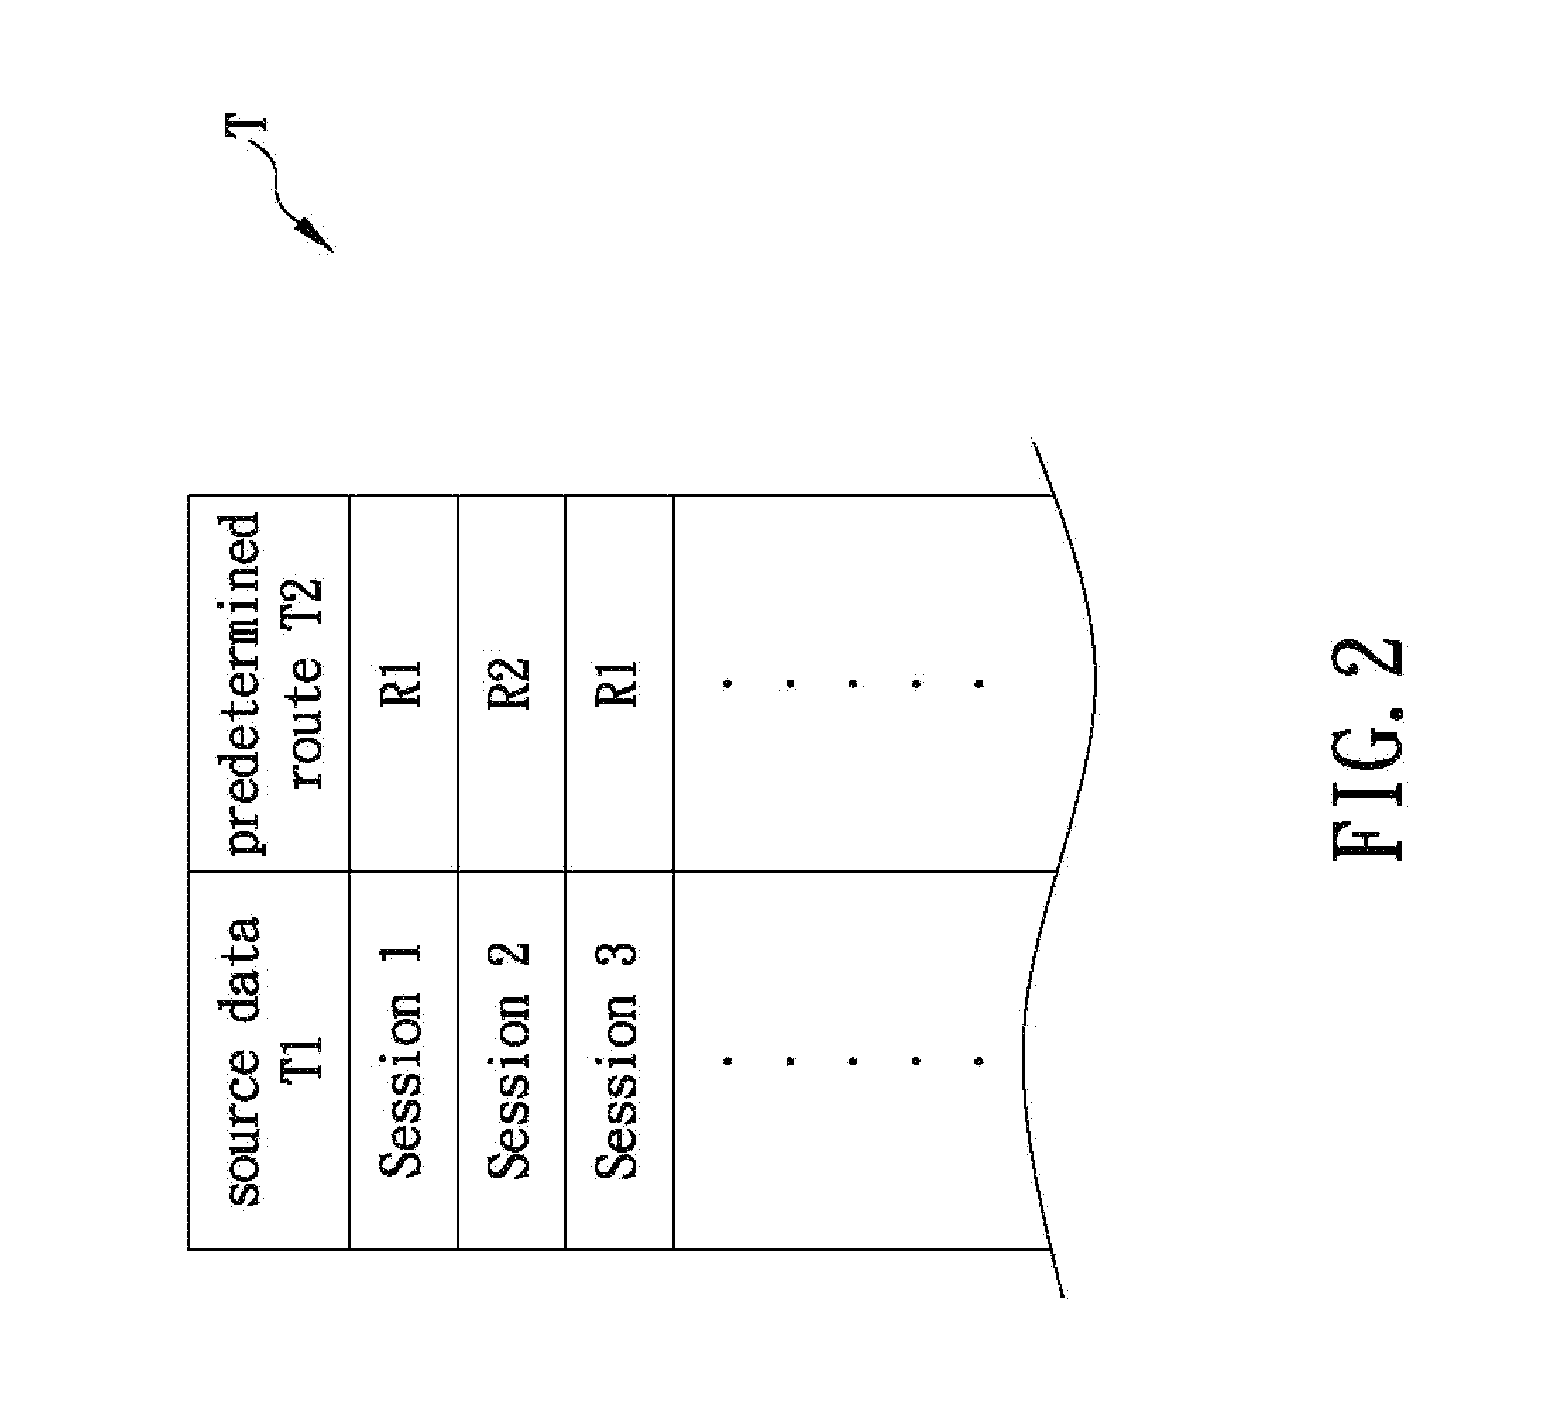 Network connection method capable of analyzing data packets in order to select connection routes